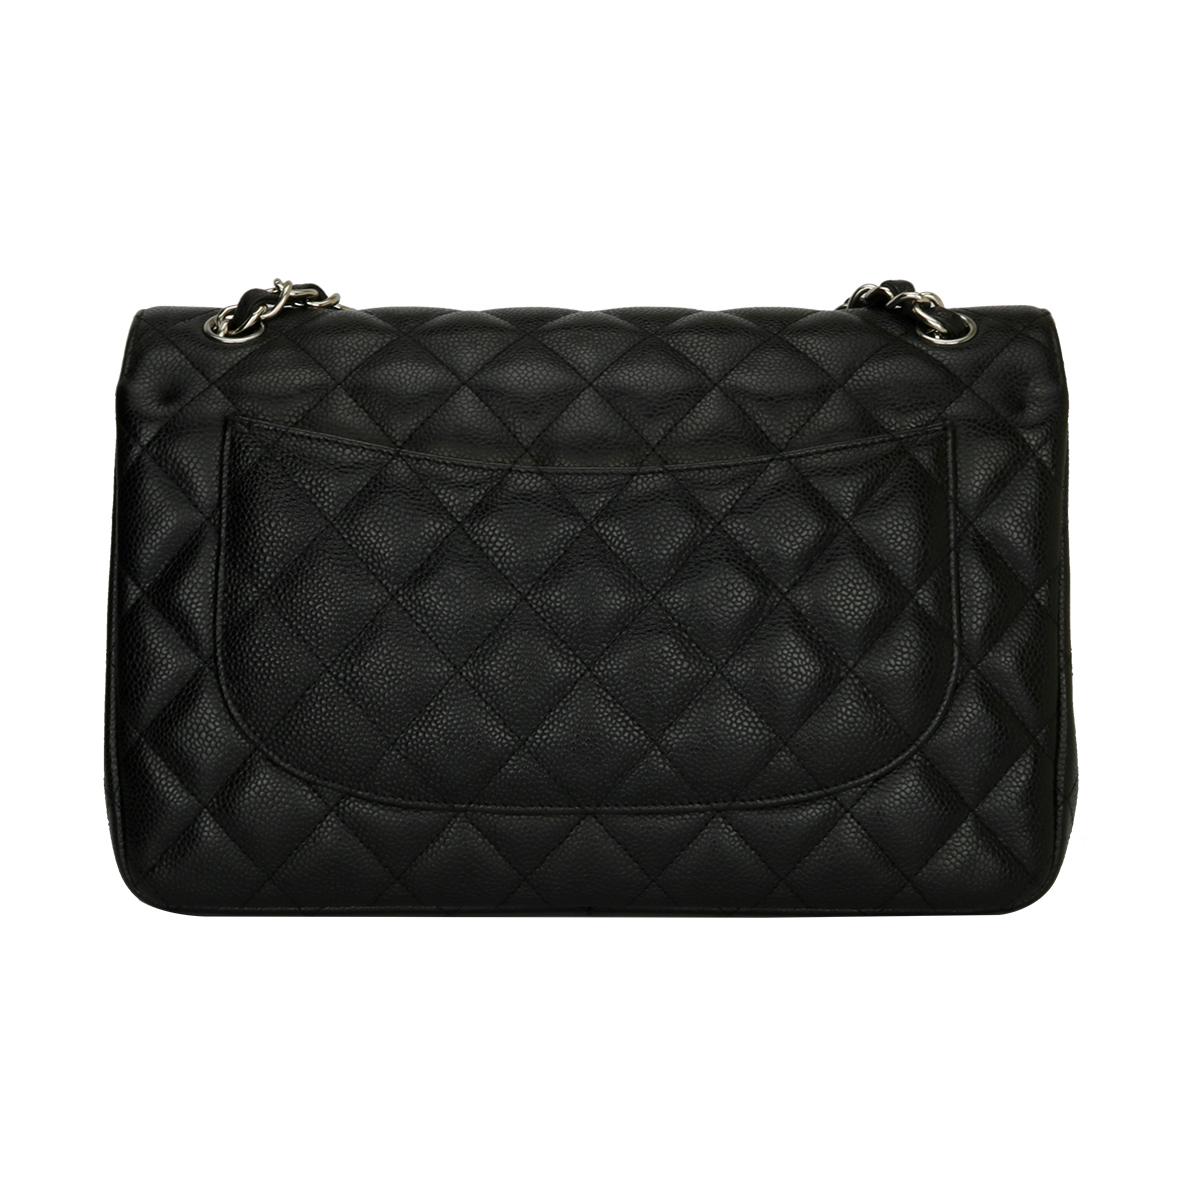 Women's or Men's CHANEL Classic Jumbo Double Flap Black Caviar with Silver Hardware 2011